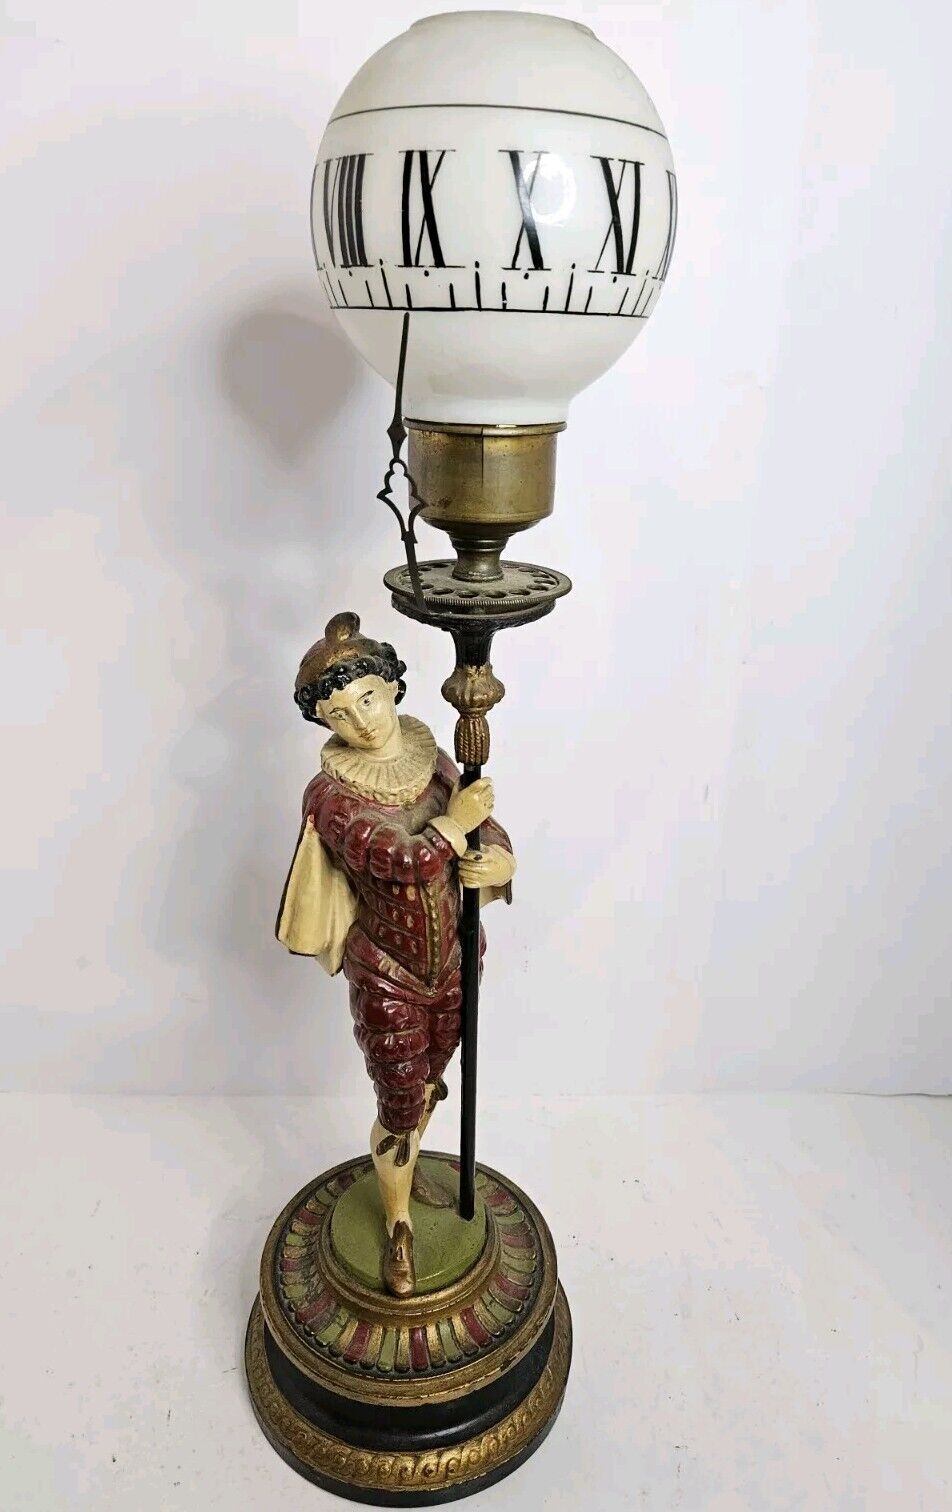 Antique 1800's French Candle Illuminated Annular Figural Statue Victorian Clock